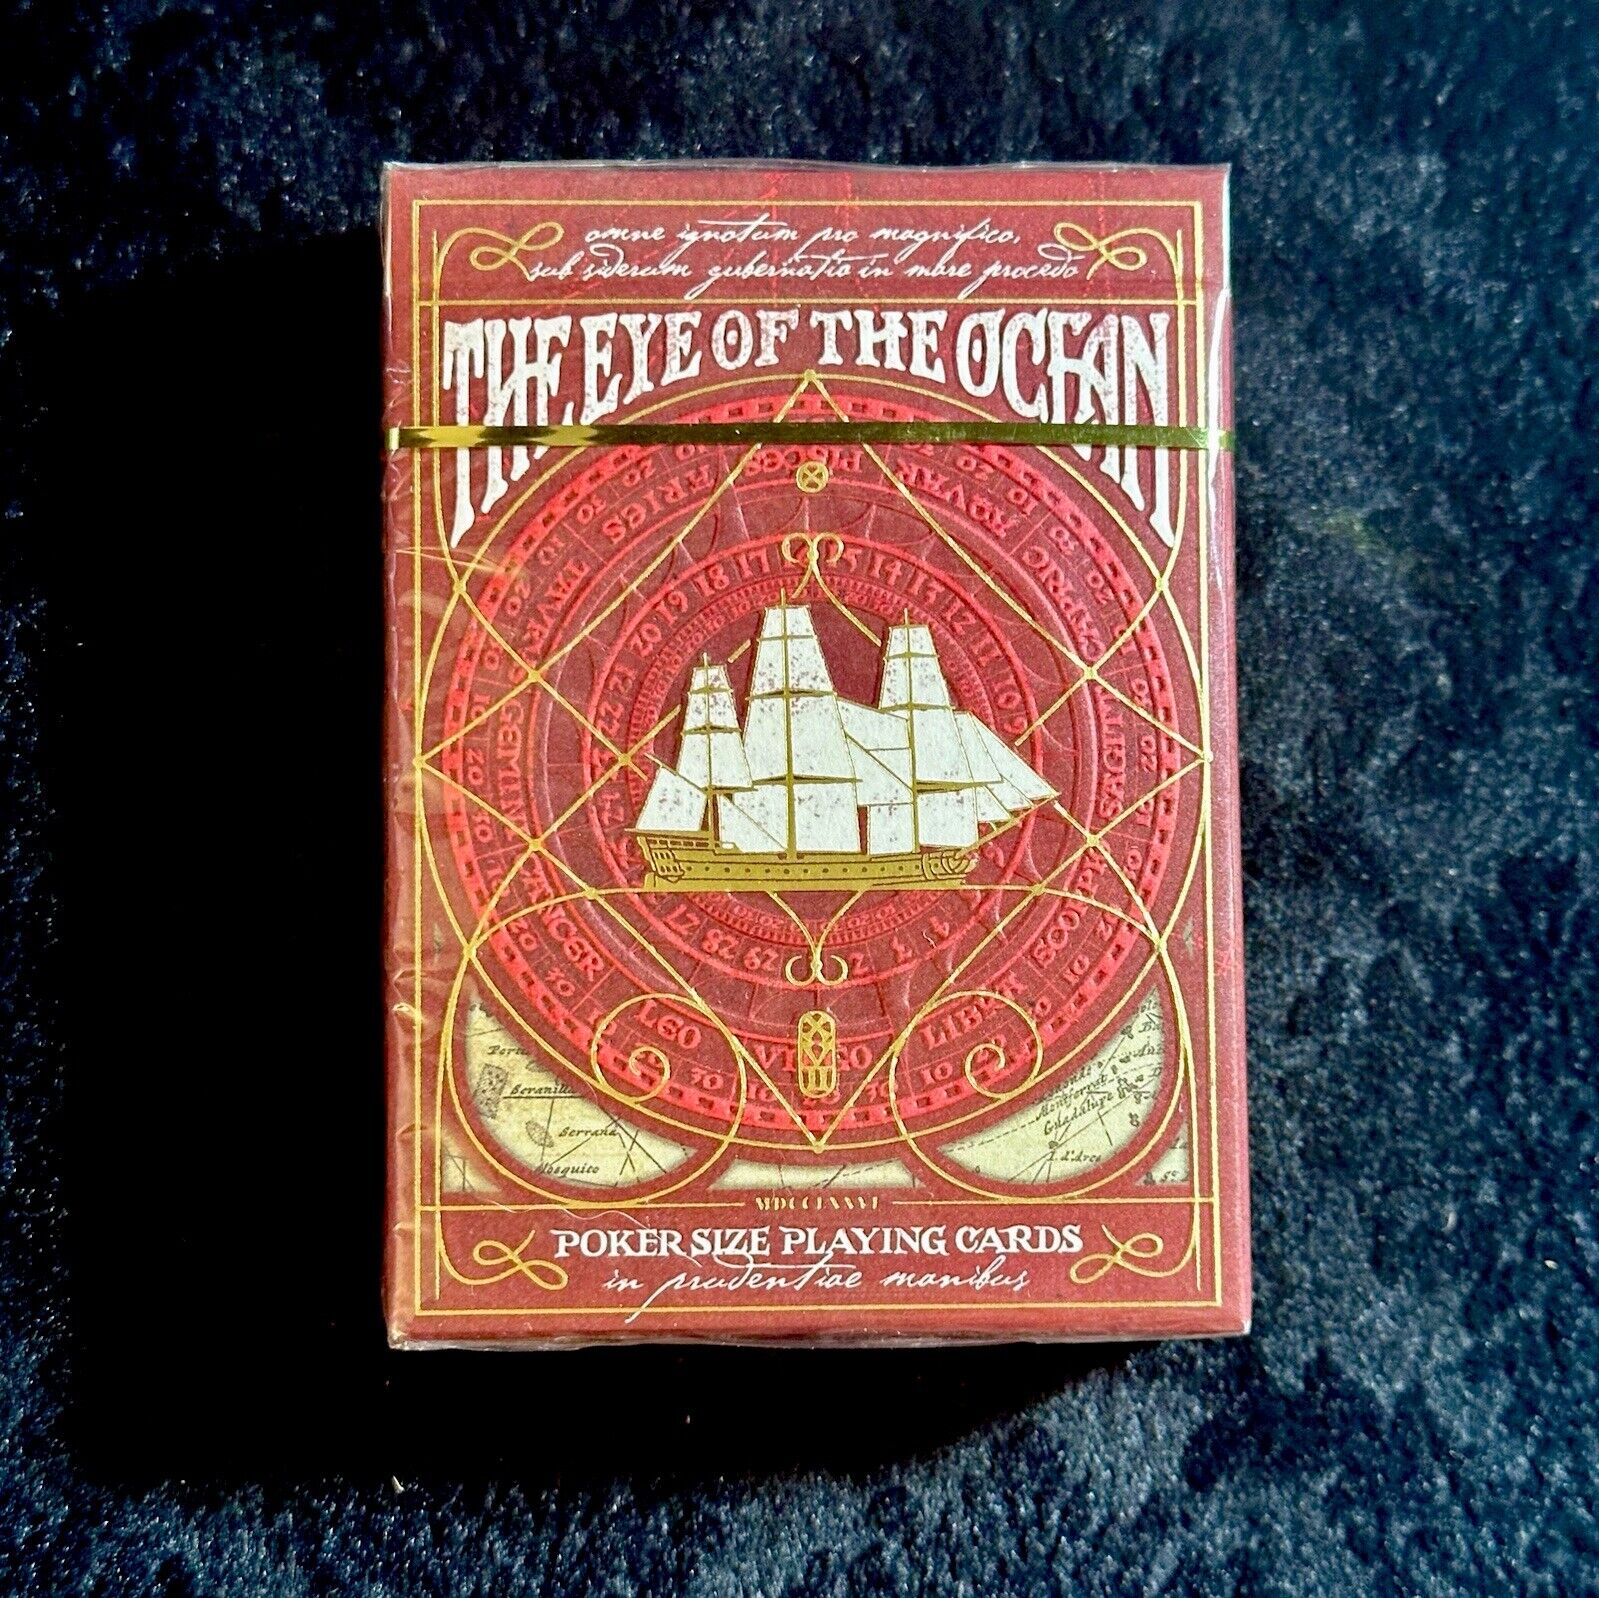 Stockholm 17 Eye of the Ocean INTREPID Edition Playing Cards